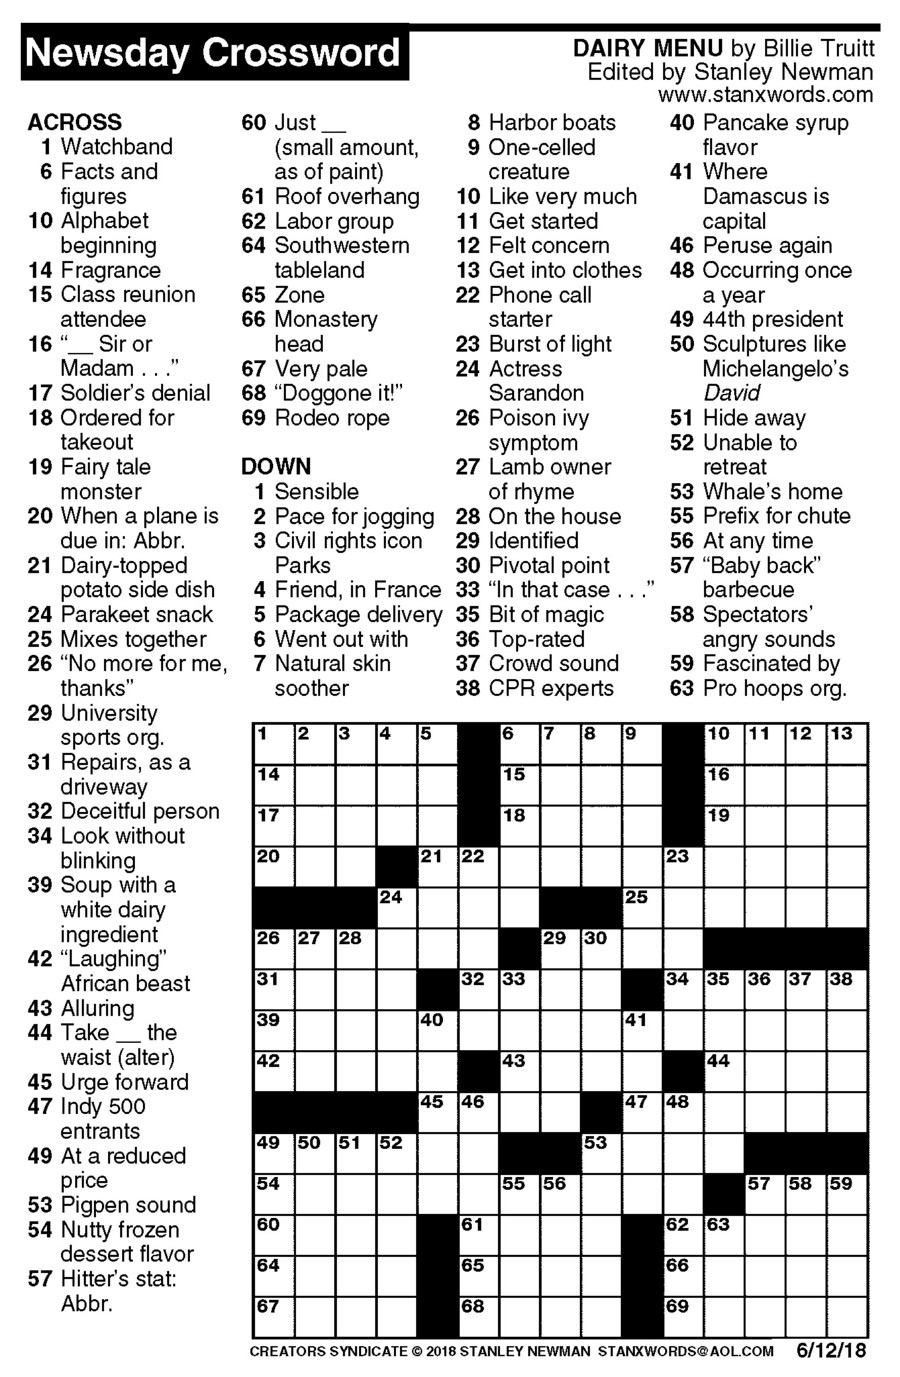 Newsday Crossword Puzzle For Jun 12 2018 stanley Newman Printable 